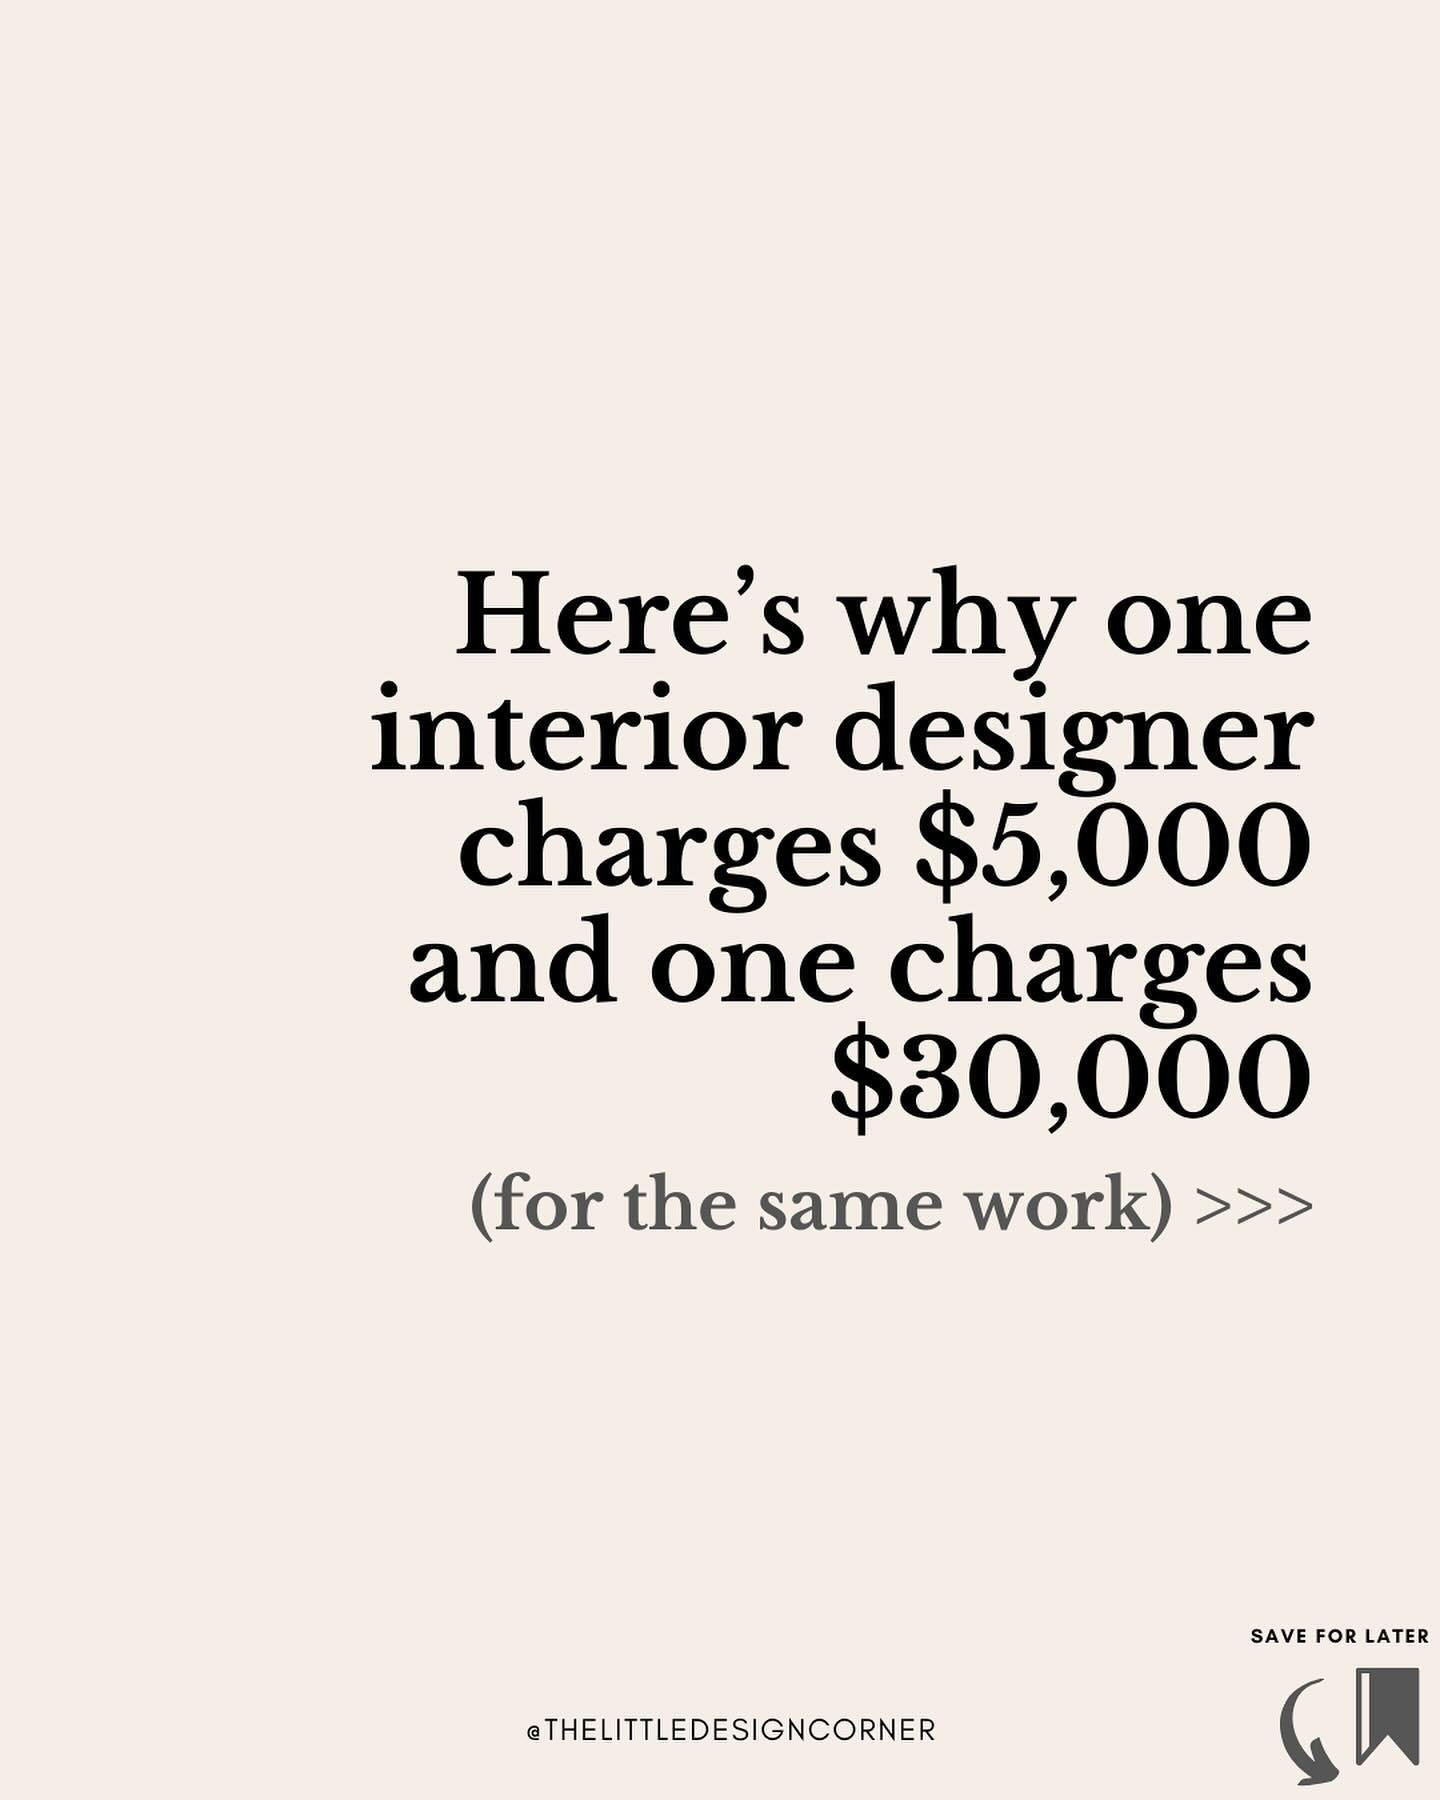 Interior design is not a budget service. ⬇️

You need to attract high value clients that value the work that you do.

This is how to build a profitable and sustainable business that you enjoy working in (and where you feel the effort you put in is wo